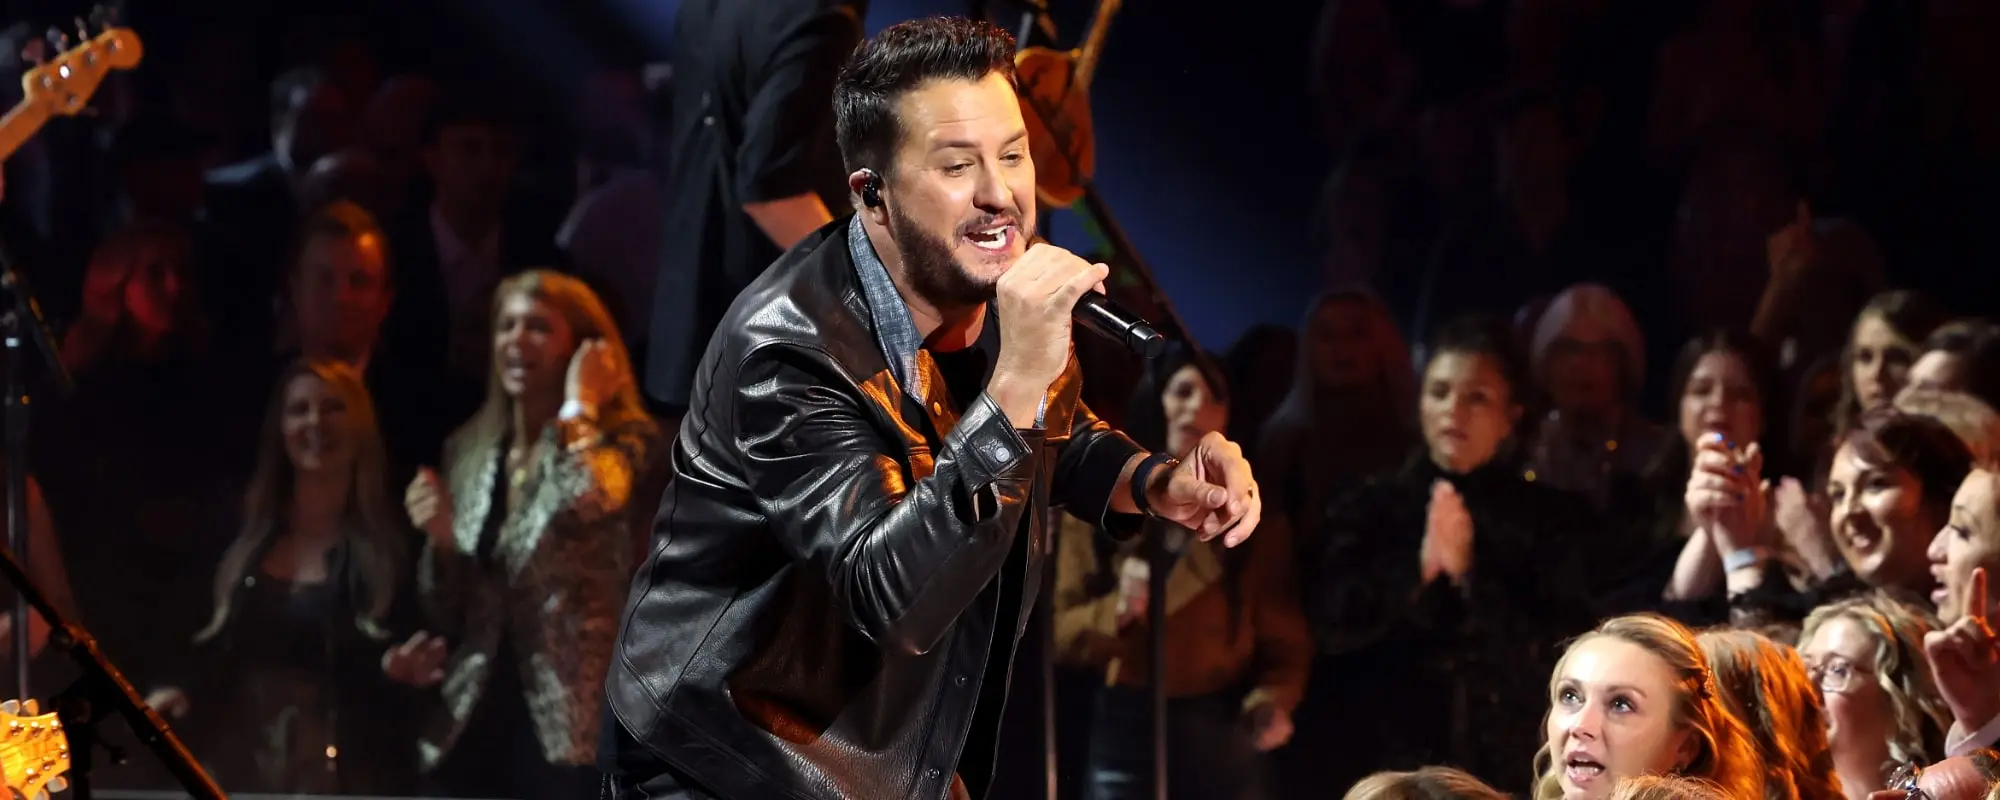 Luke Bryan Reflects on the Relatability of His Latest Single “Love You, Miss You, Mean It”